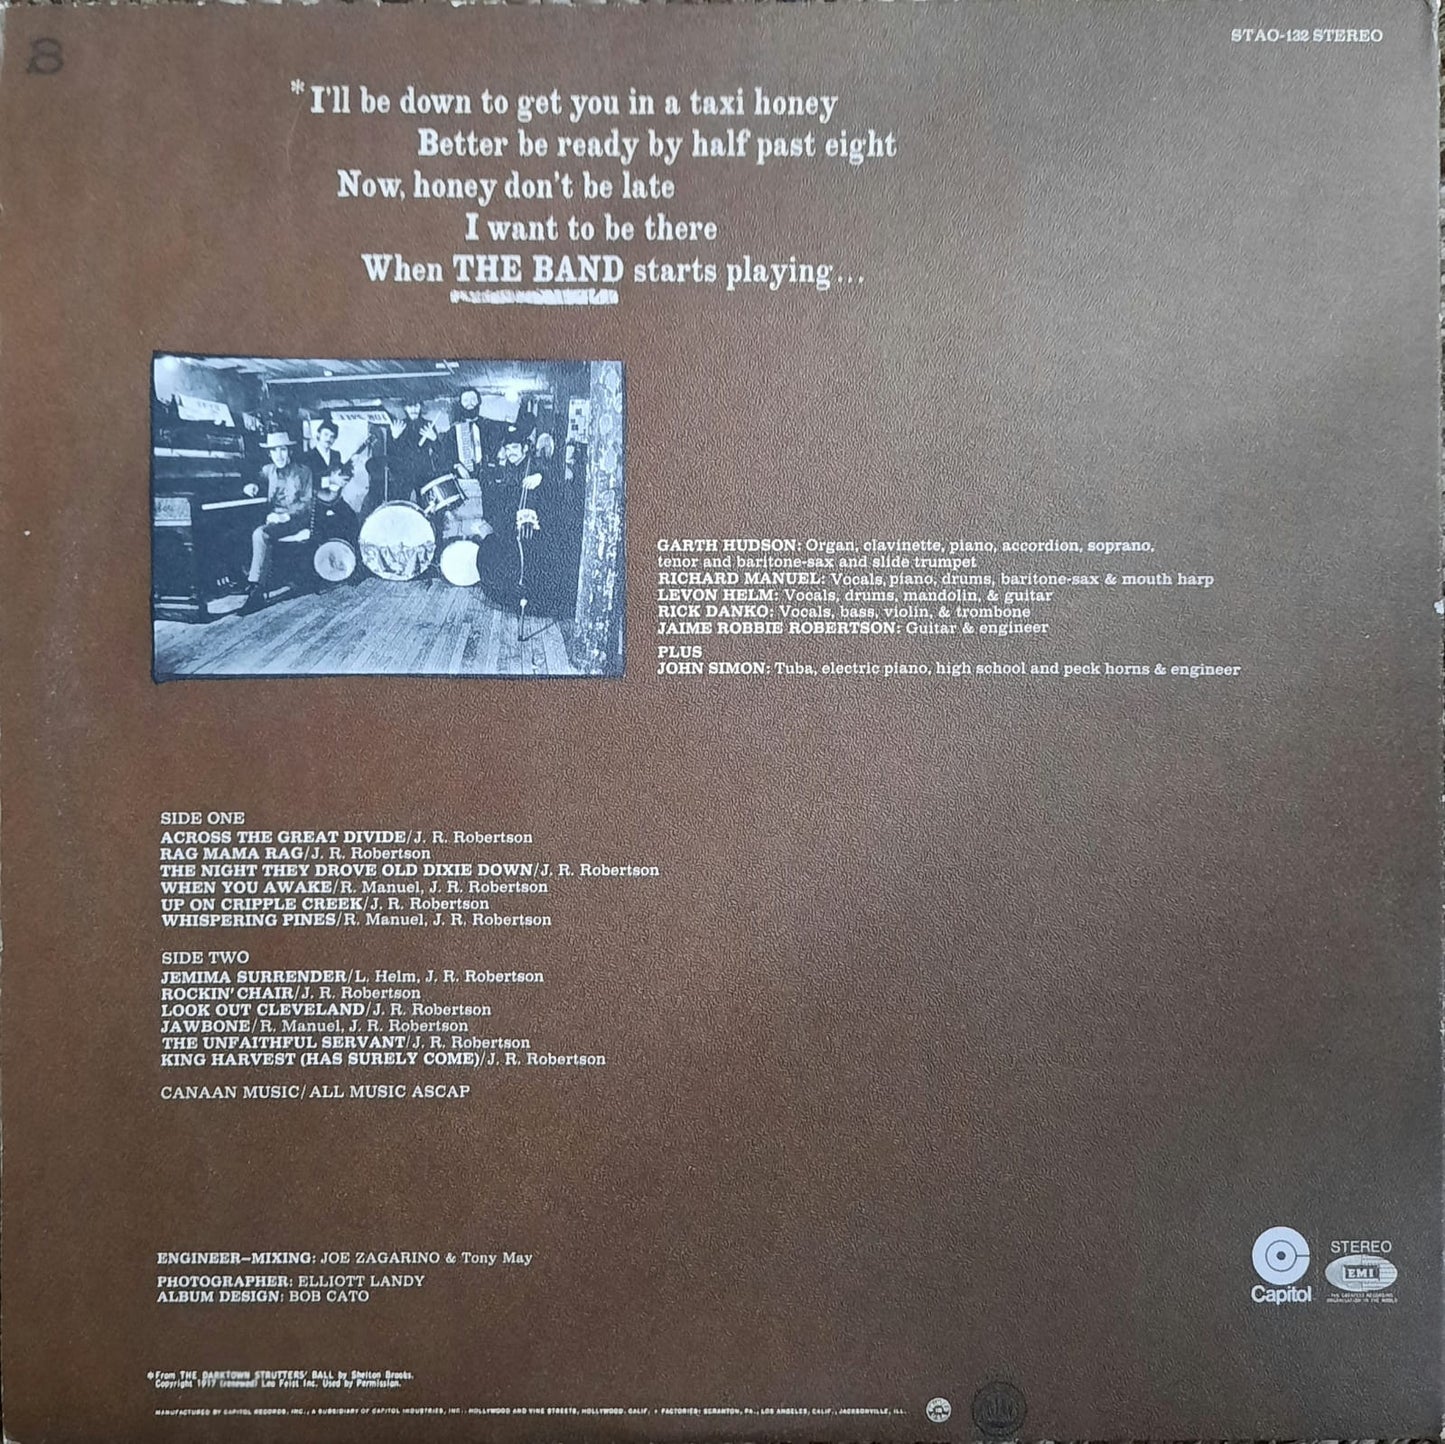 The Band - The Band (LP, EE.UU., 1969)